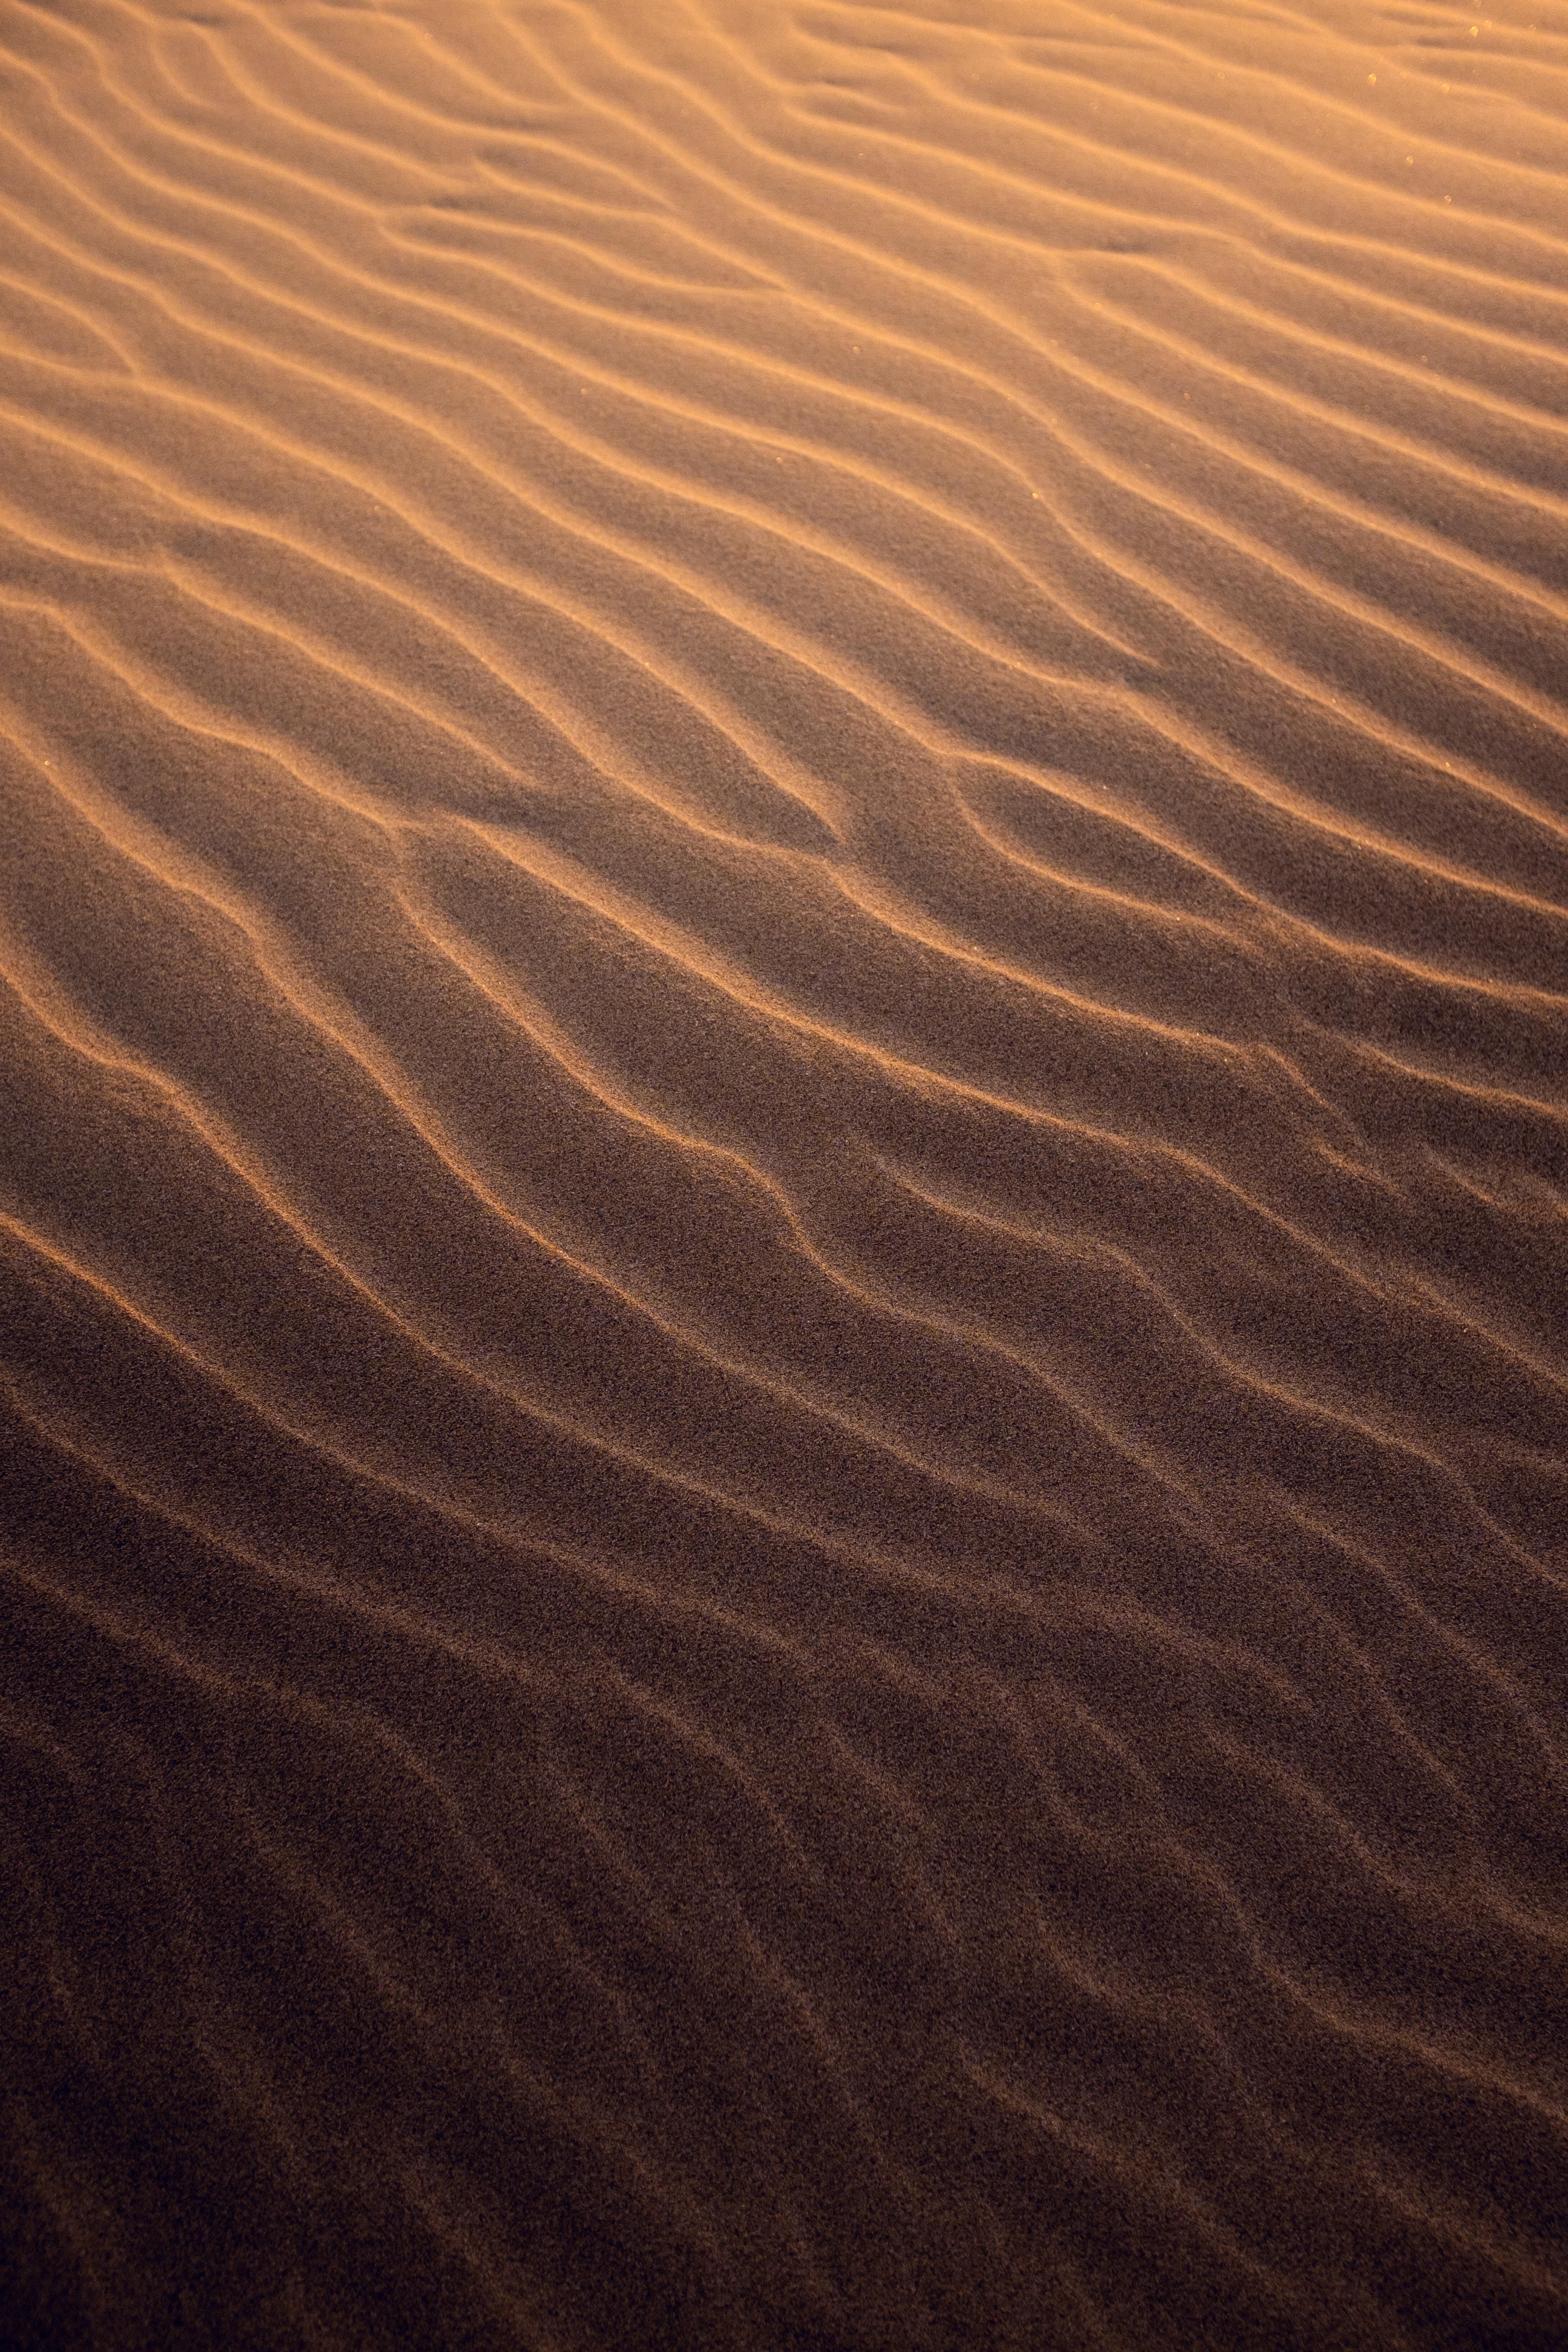 textures, waves, sand, ripples, ripple, texture, brown